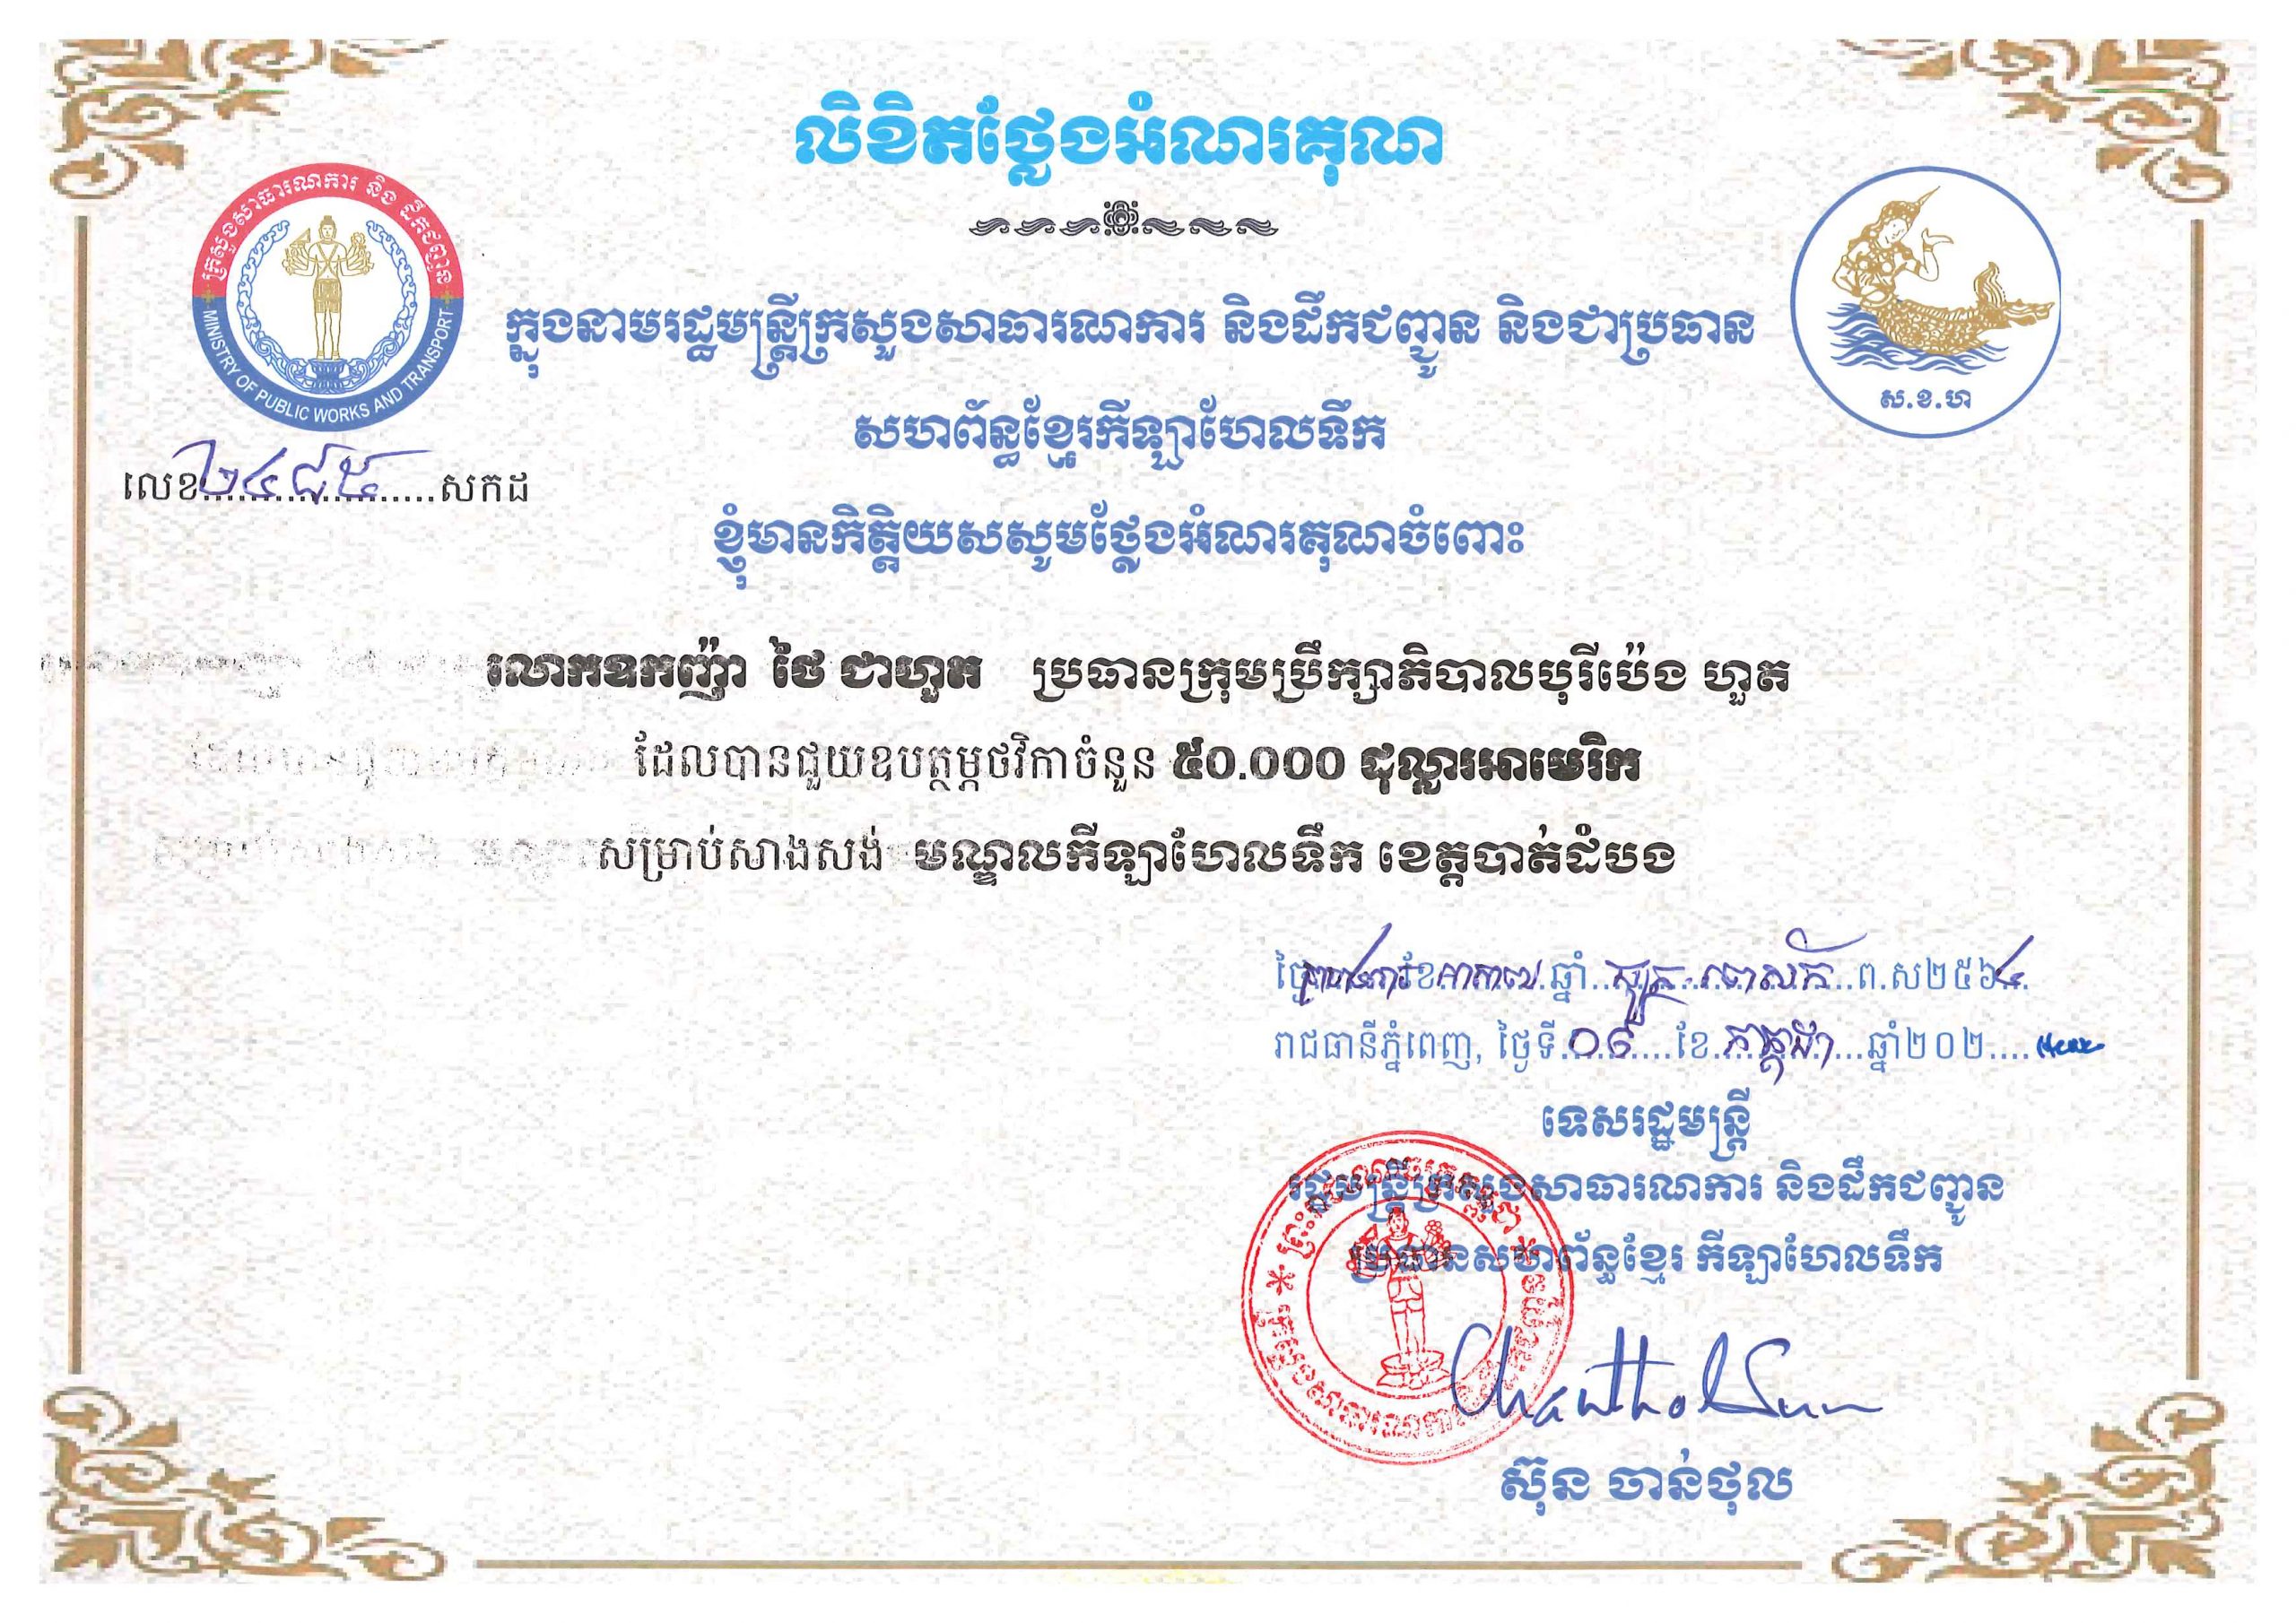 Certificate of Appreciation from Ministry of Public Works and Transport for USD 50,000 to build sport center in Battambang province